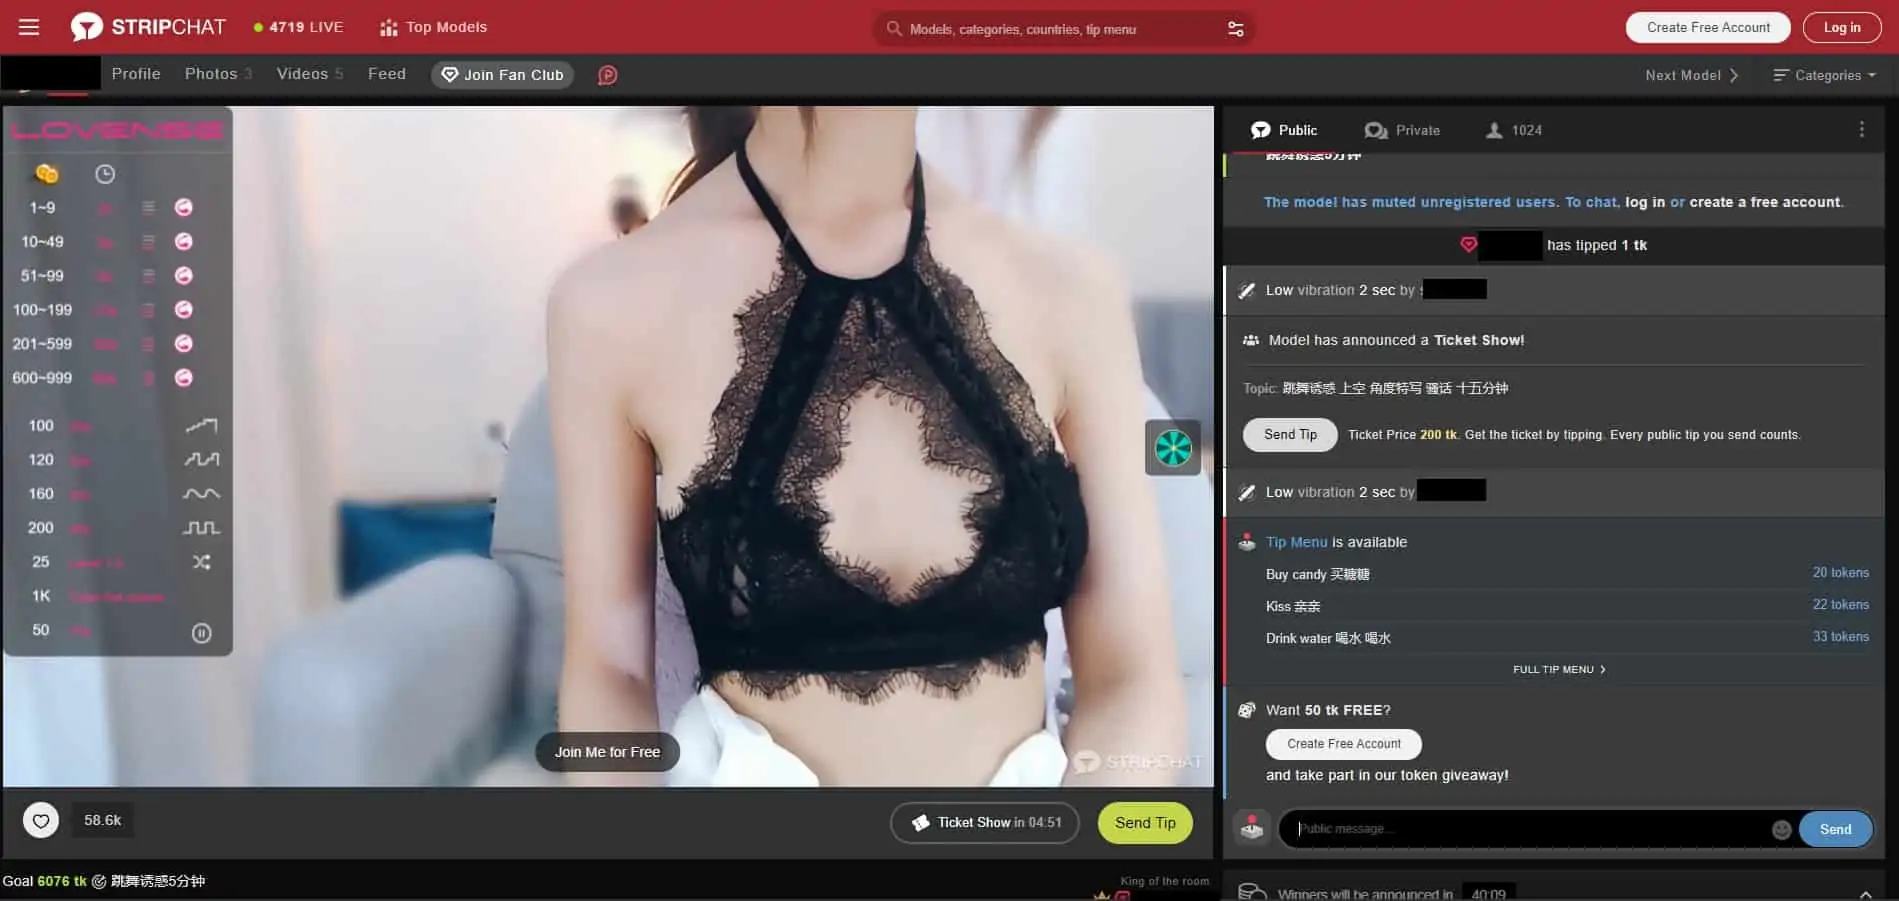 Sex cam site Stripchat exposes user, model info on the web report picture